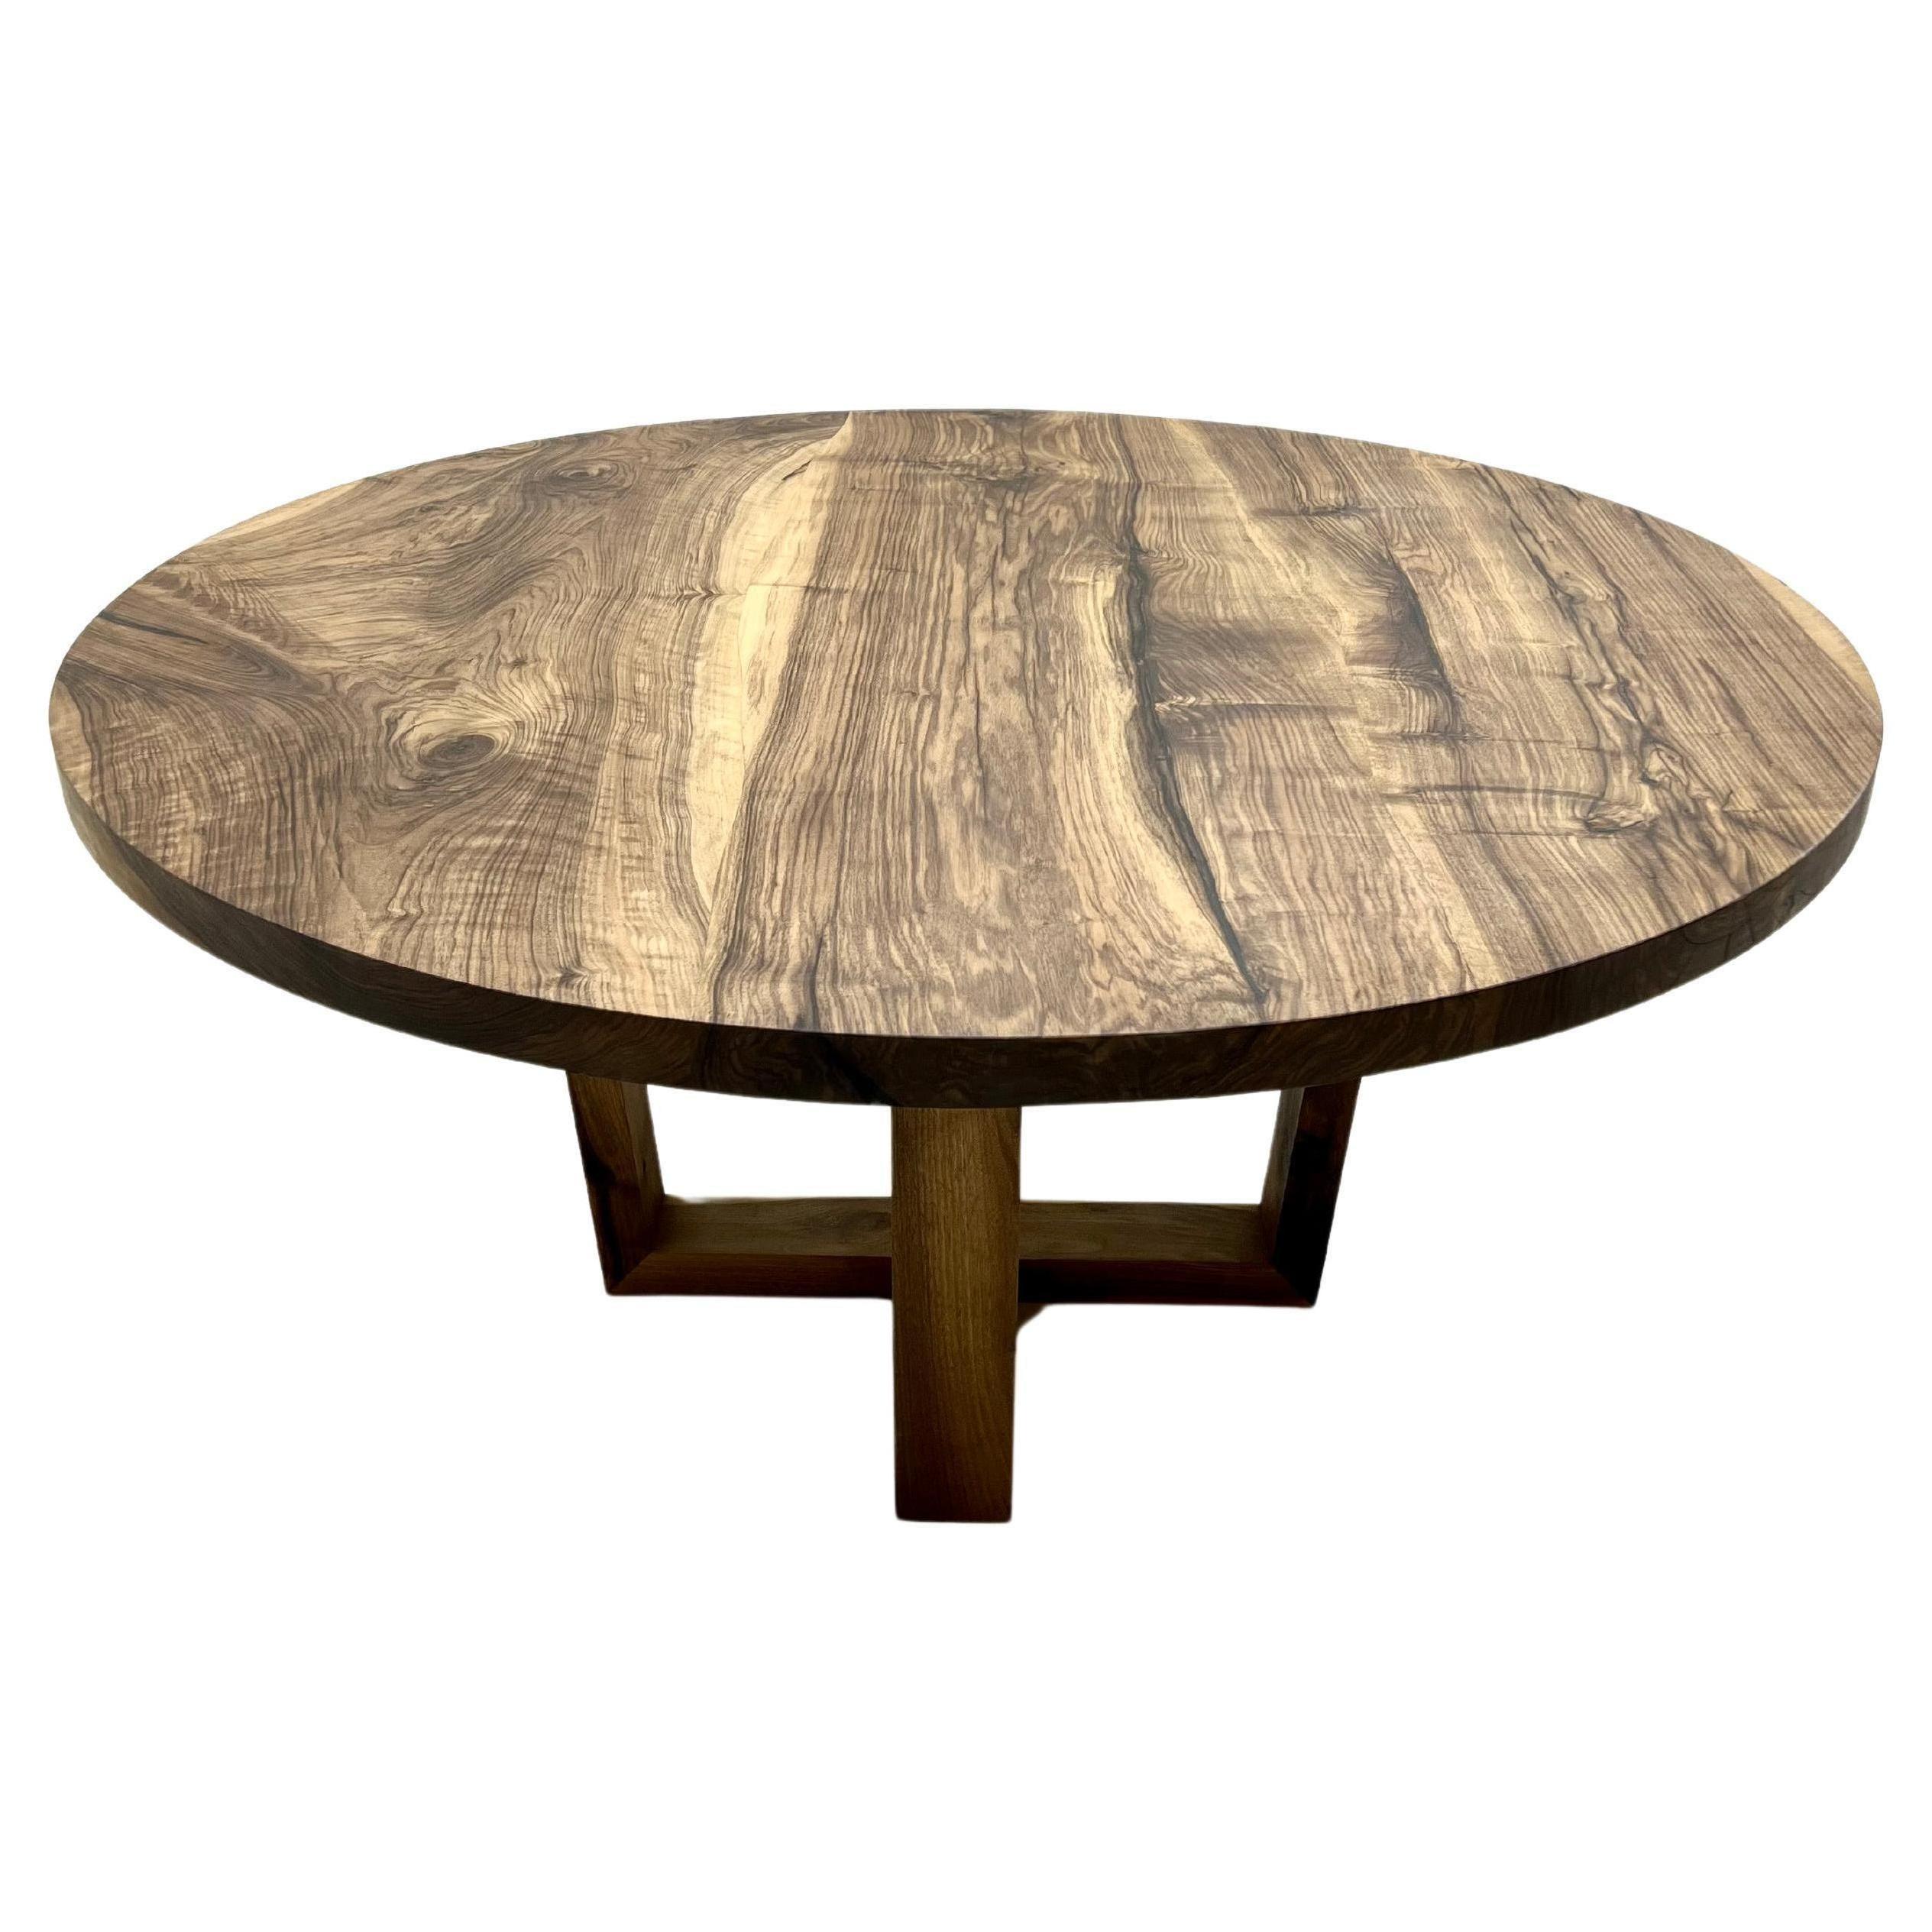 Custom Wooden Walnut Rustic Round Conference Table 